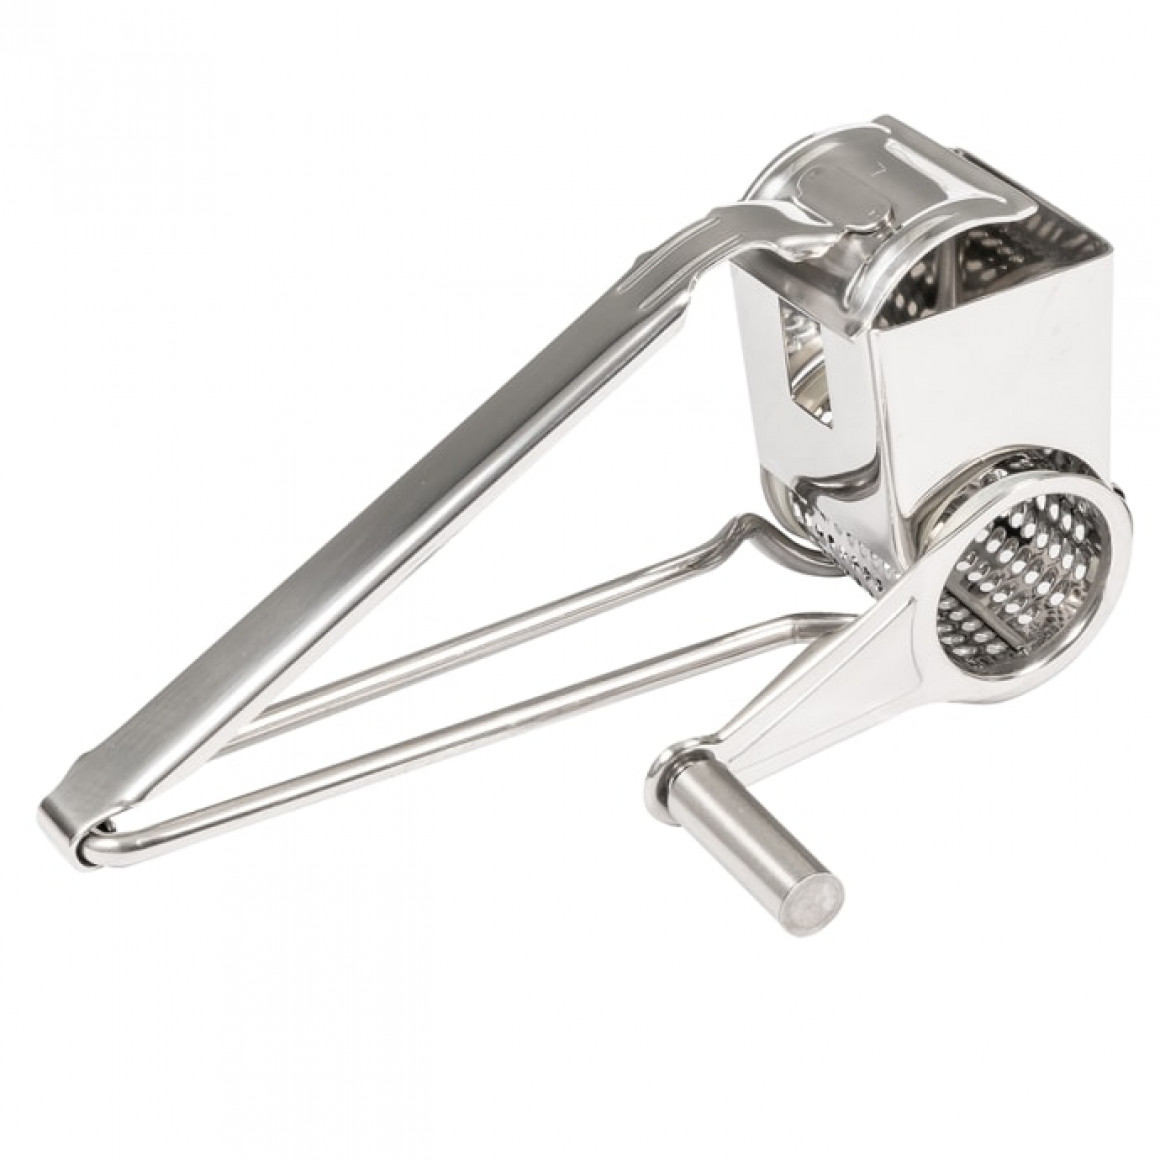 CHEESE GRATER, HANDCRANK, STAINLESS STEEL